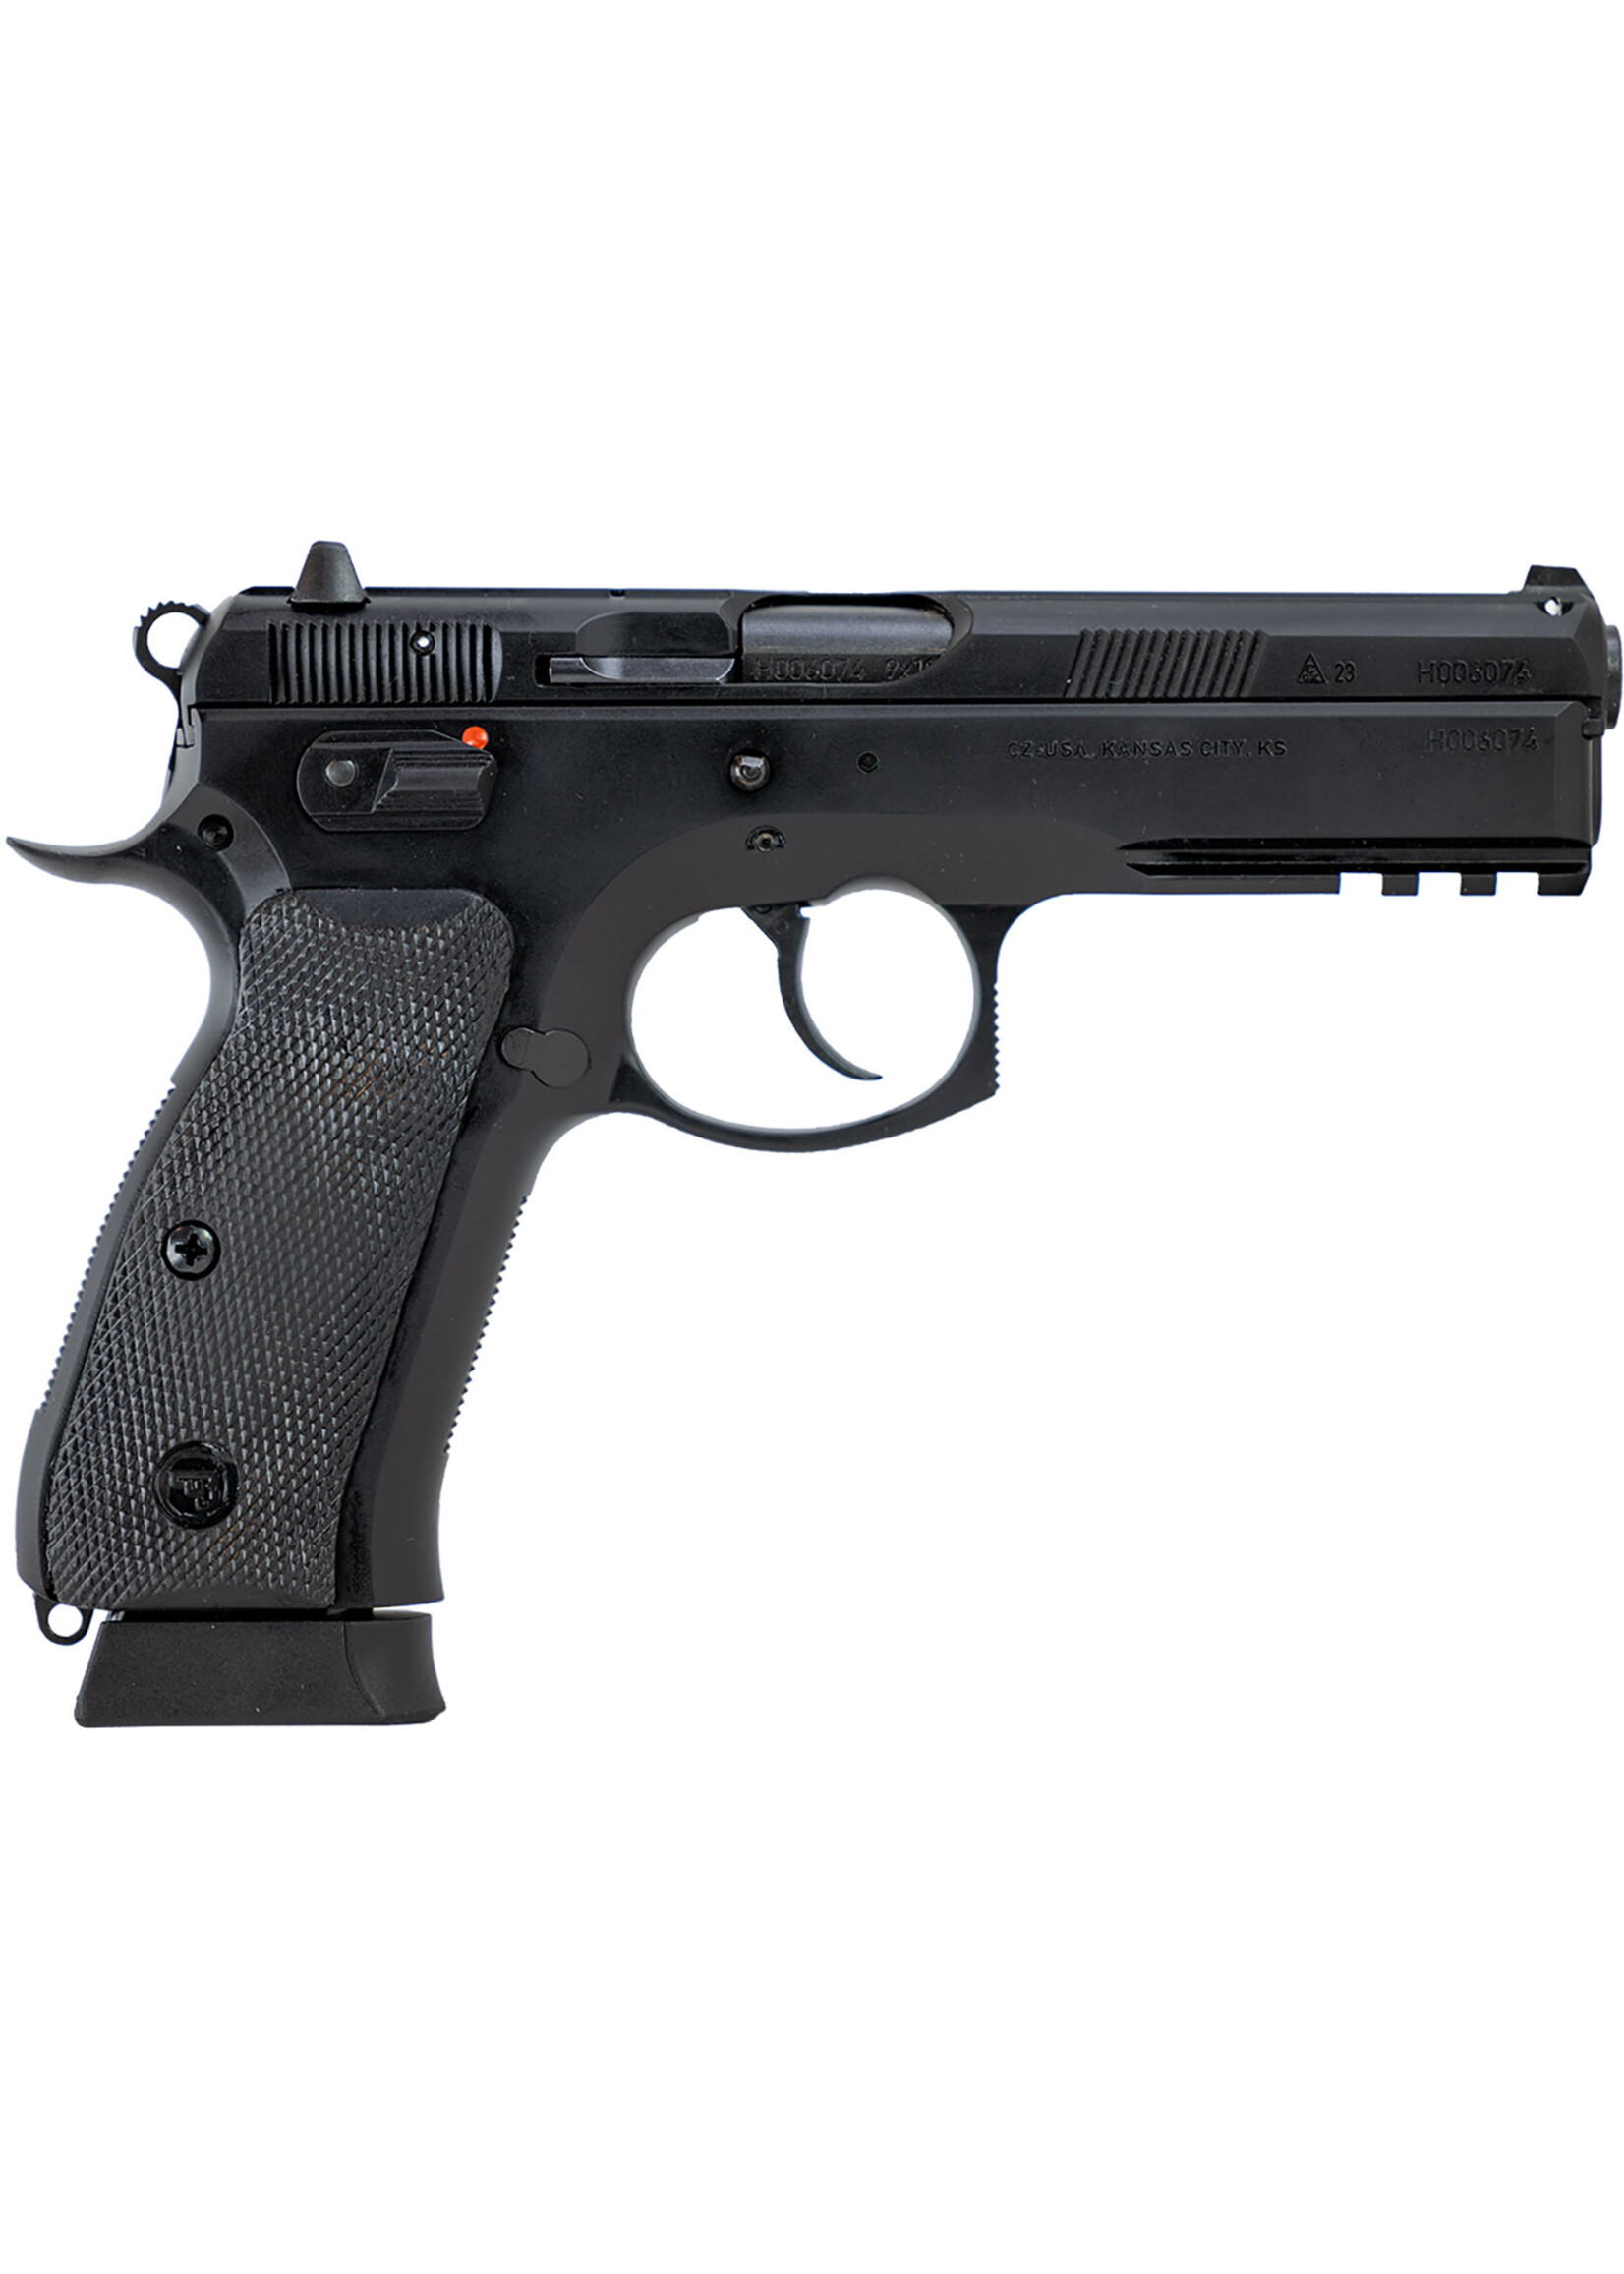 CZ USA CZ-USA 89352 CZ 75 SP-01 Tactical 9mm Luger 19+1 4.60", Manual Safety, Non-Tilted, Cold Hammer Forged Barrel, Black Inside Railed/Serrated Slide, Black Polycoat Steel w/Picatinny Rail/Serrated Trigger Guard & Beavertail Frame, Black Rubber Grips